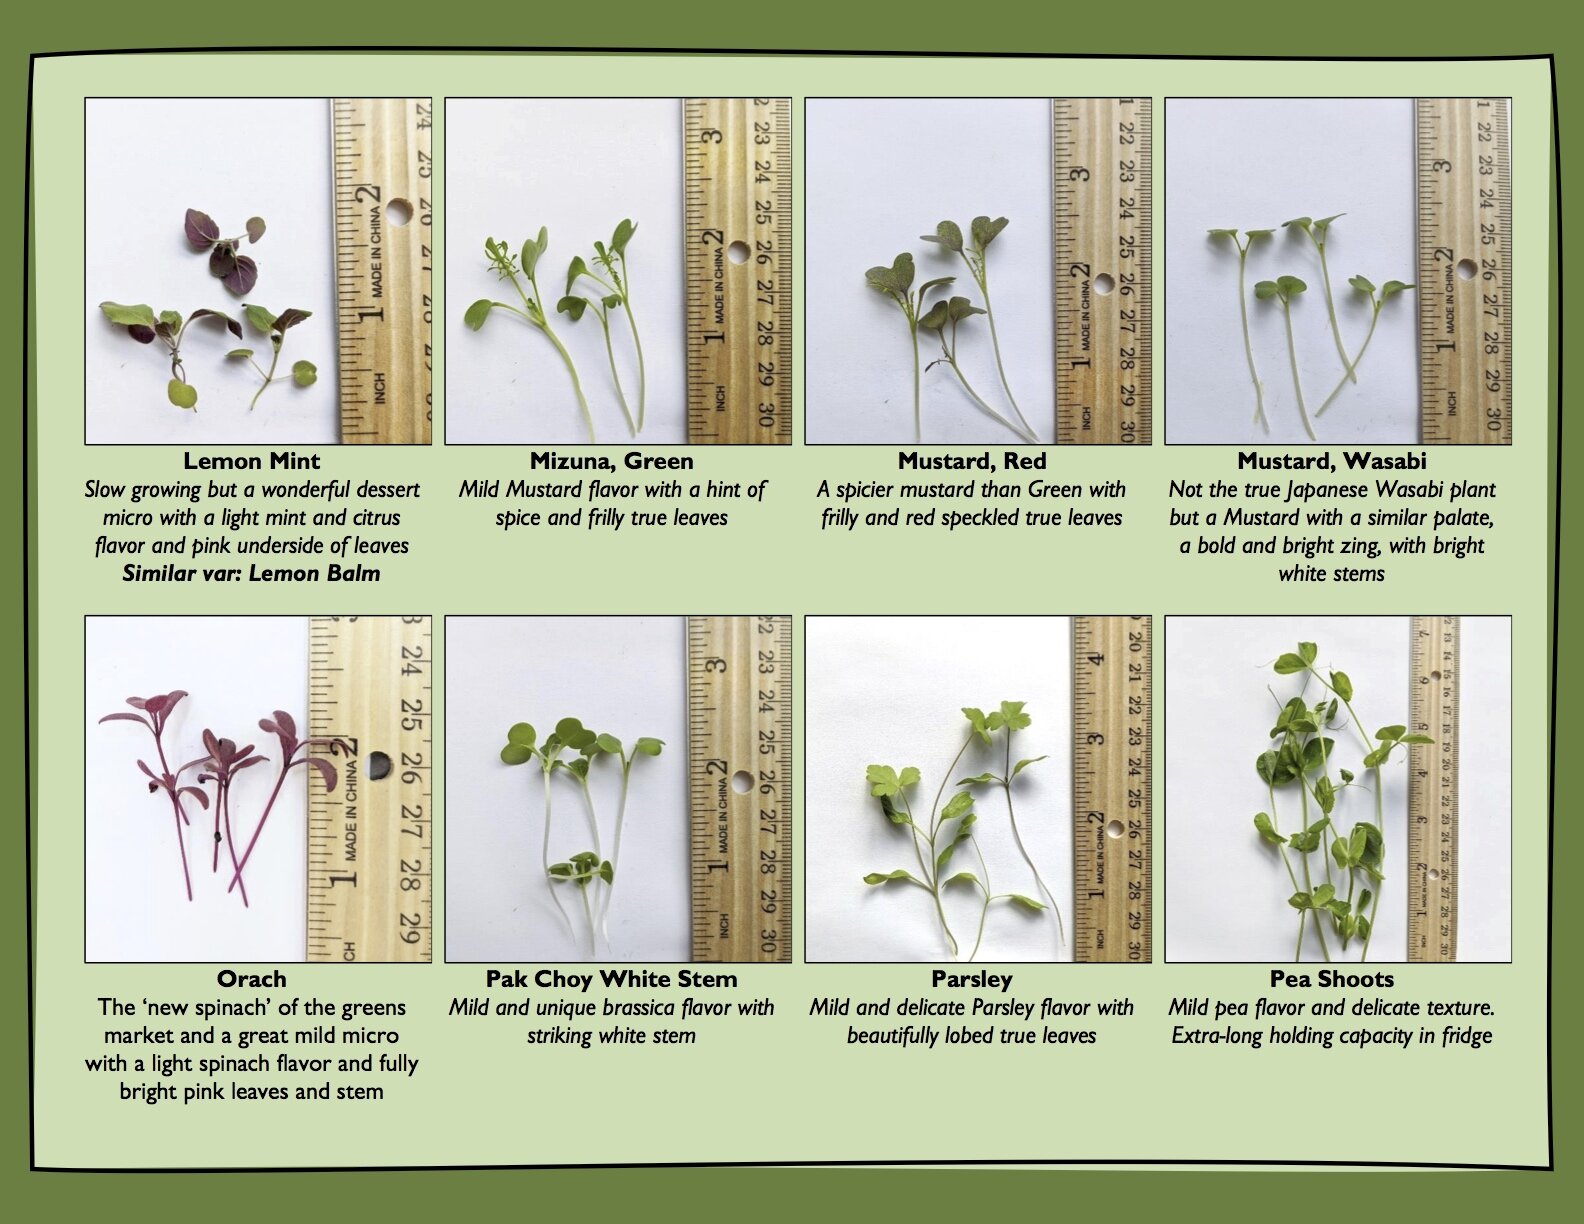 Page 3, Frog Bench Farms Microgreen Look Book.jpg